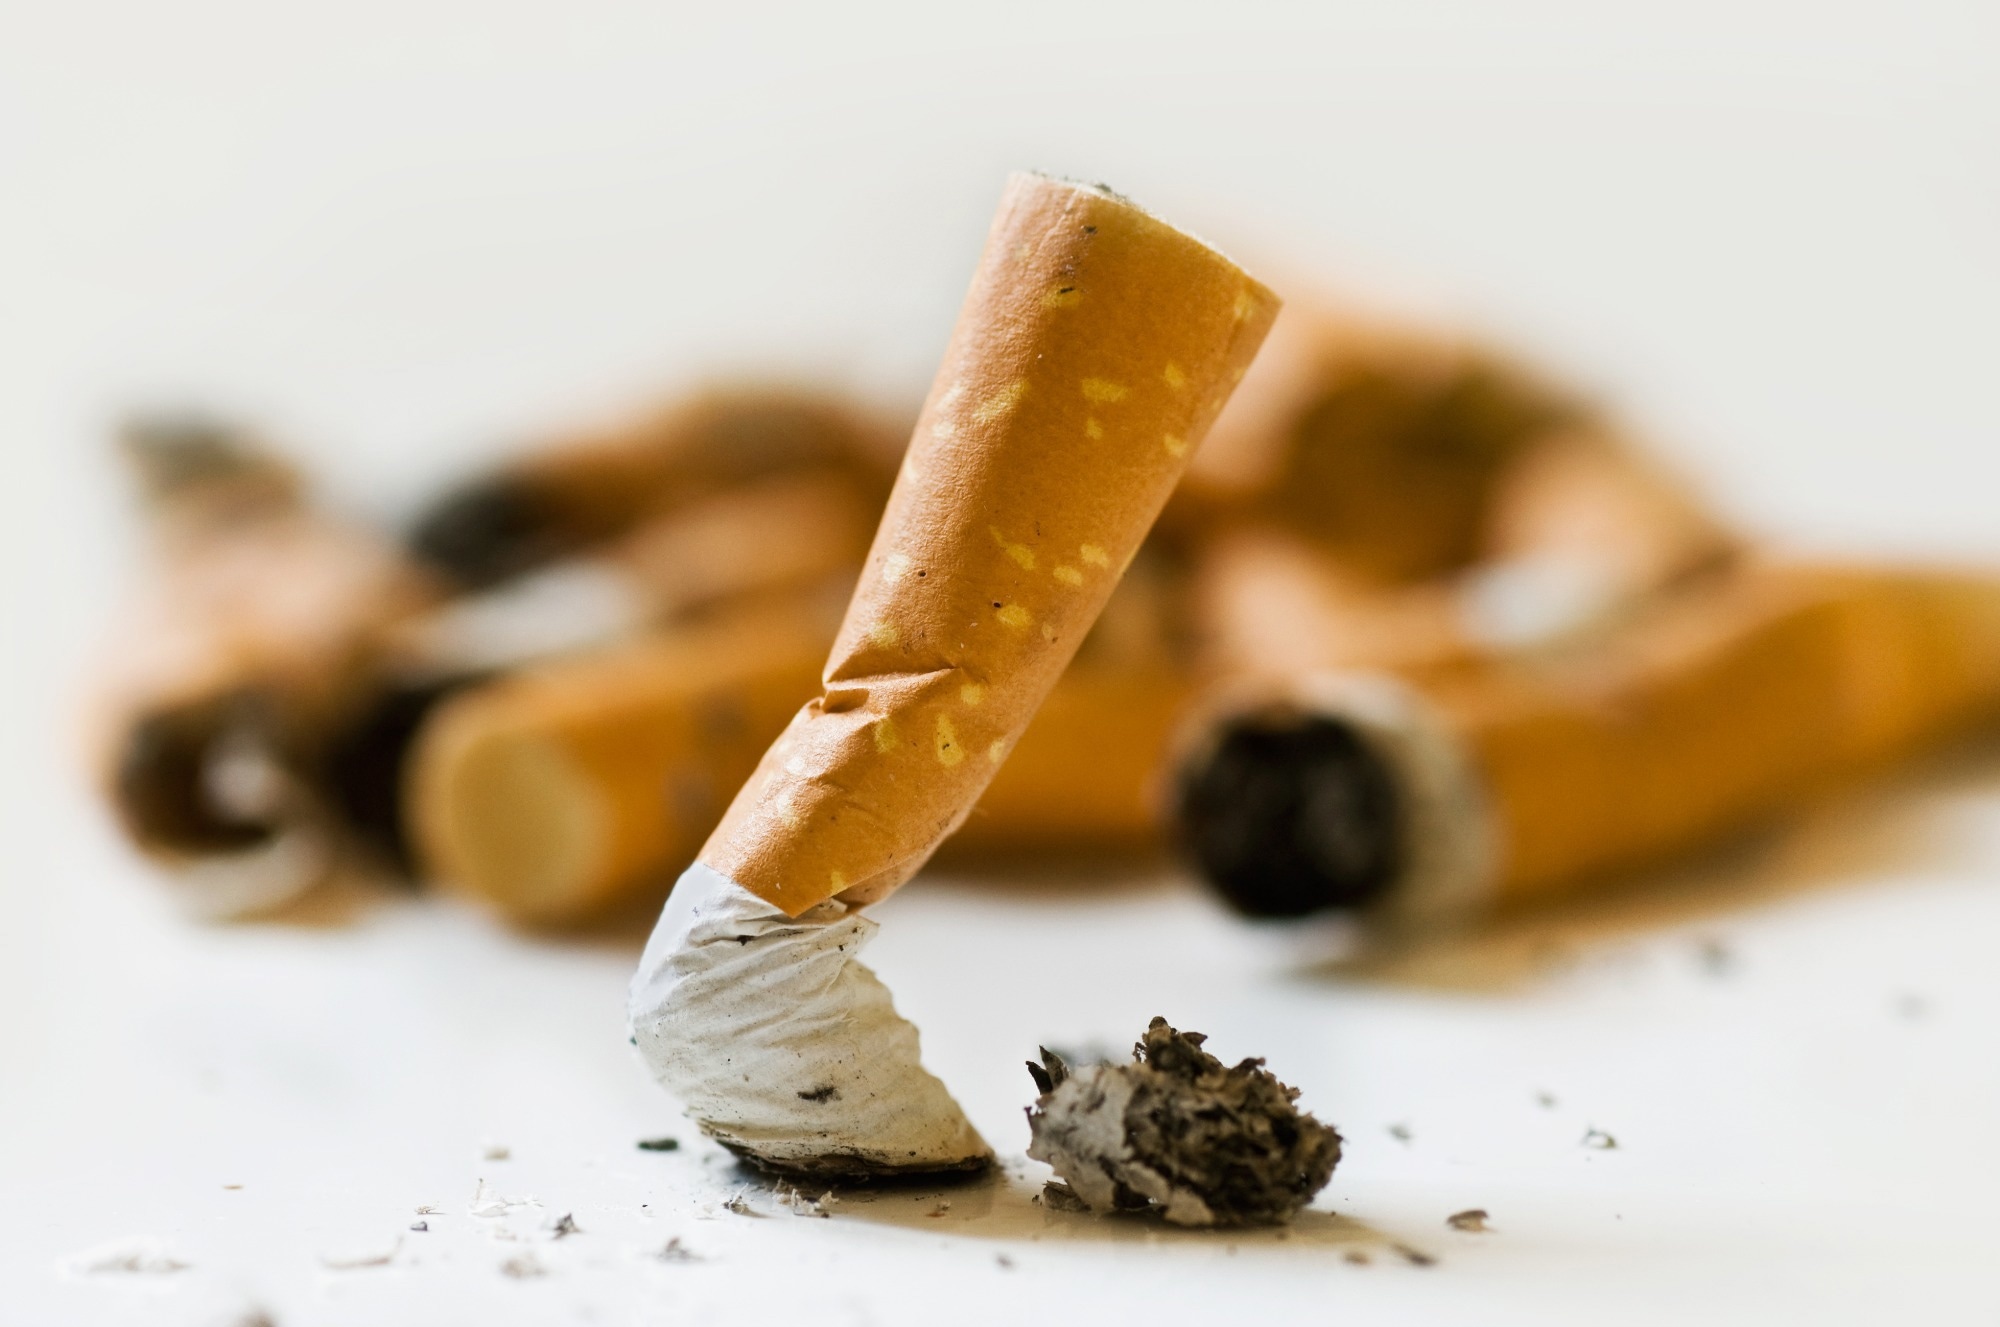 Study: Smoking changes adaptive immunity with persistent effects. Image Credit: NeydtStock / Shutterstock